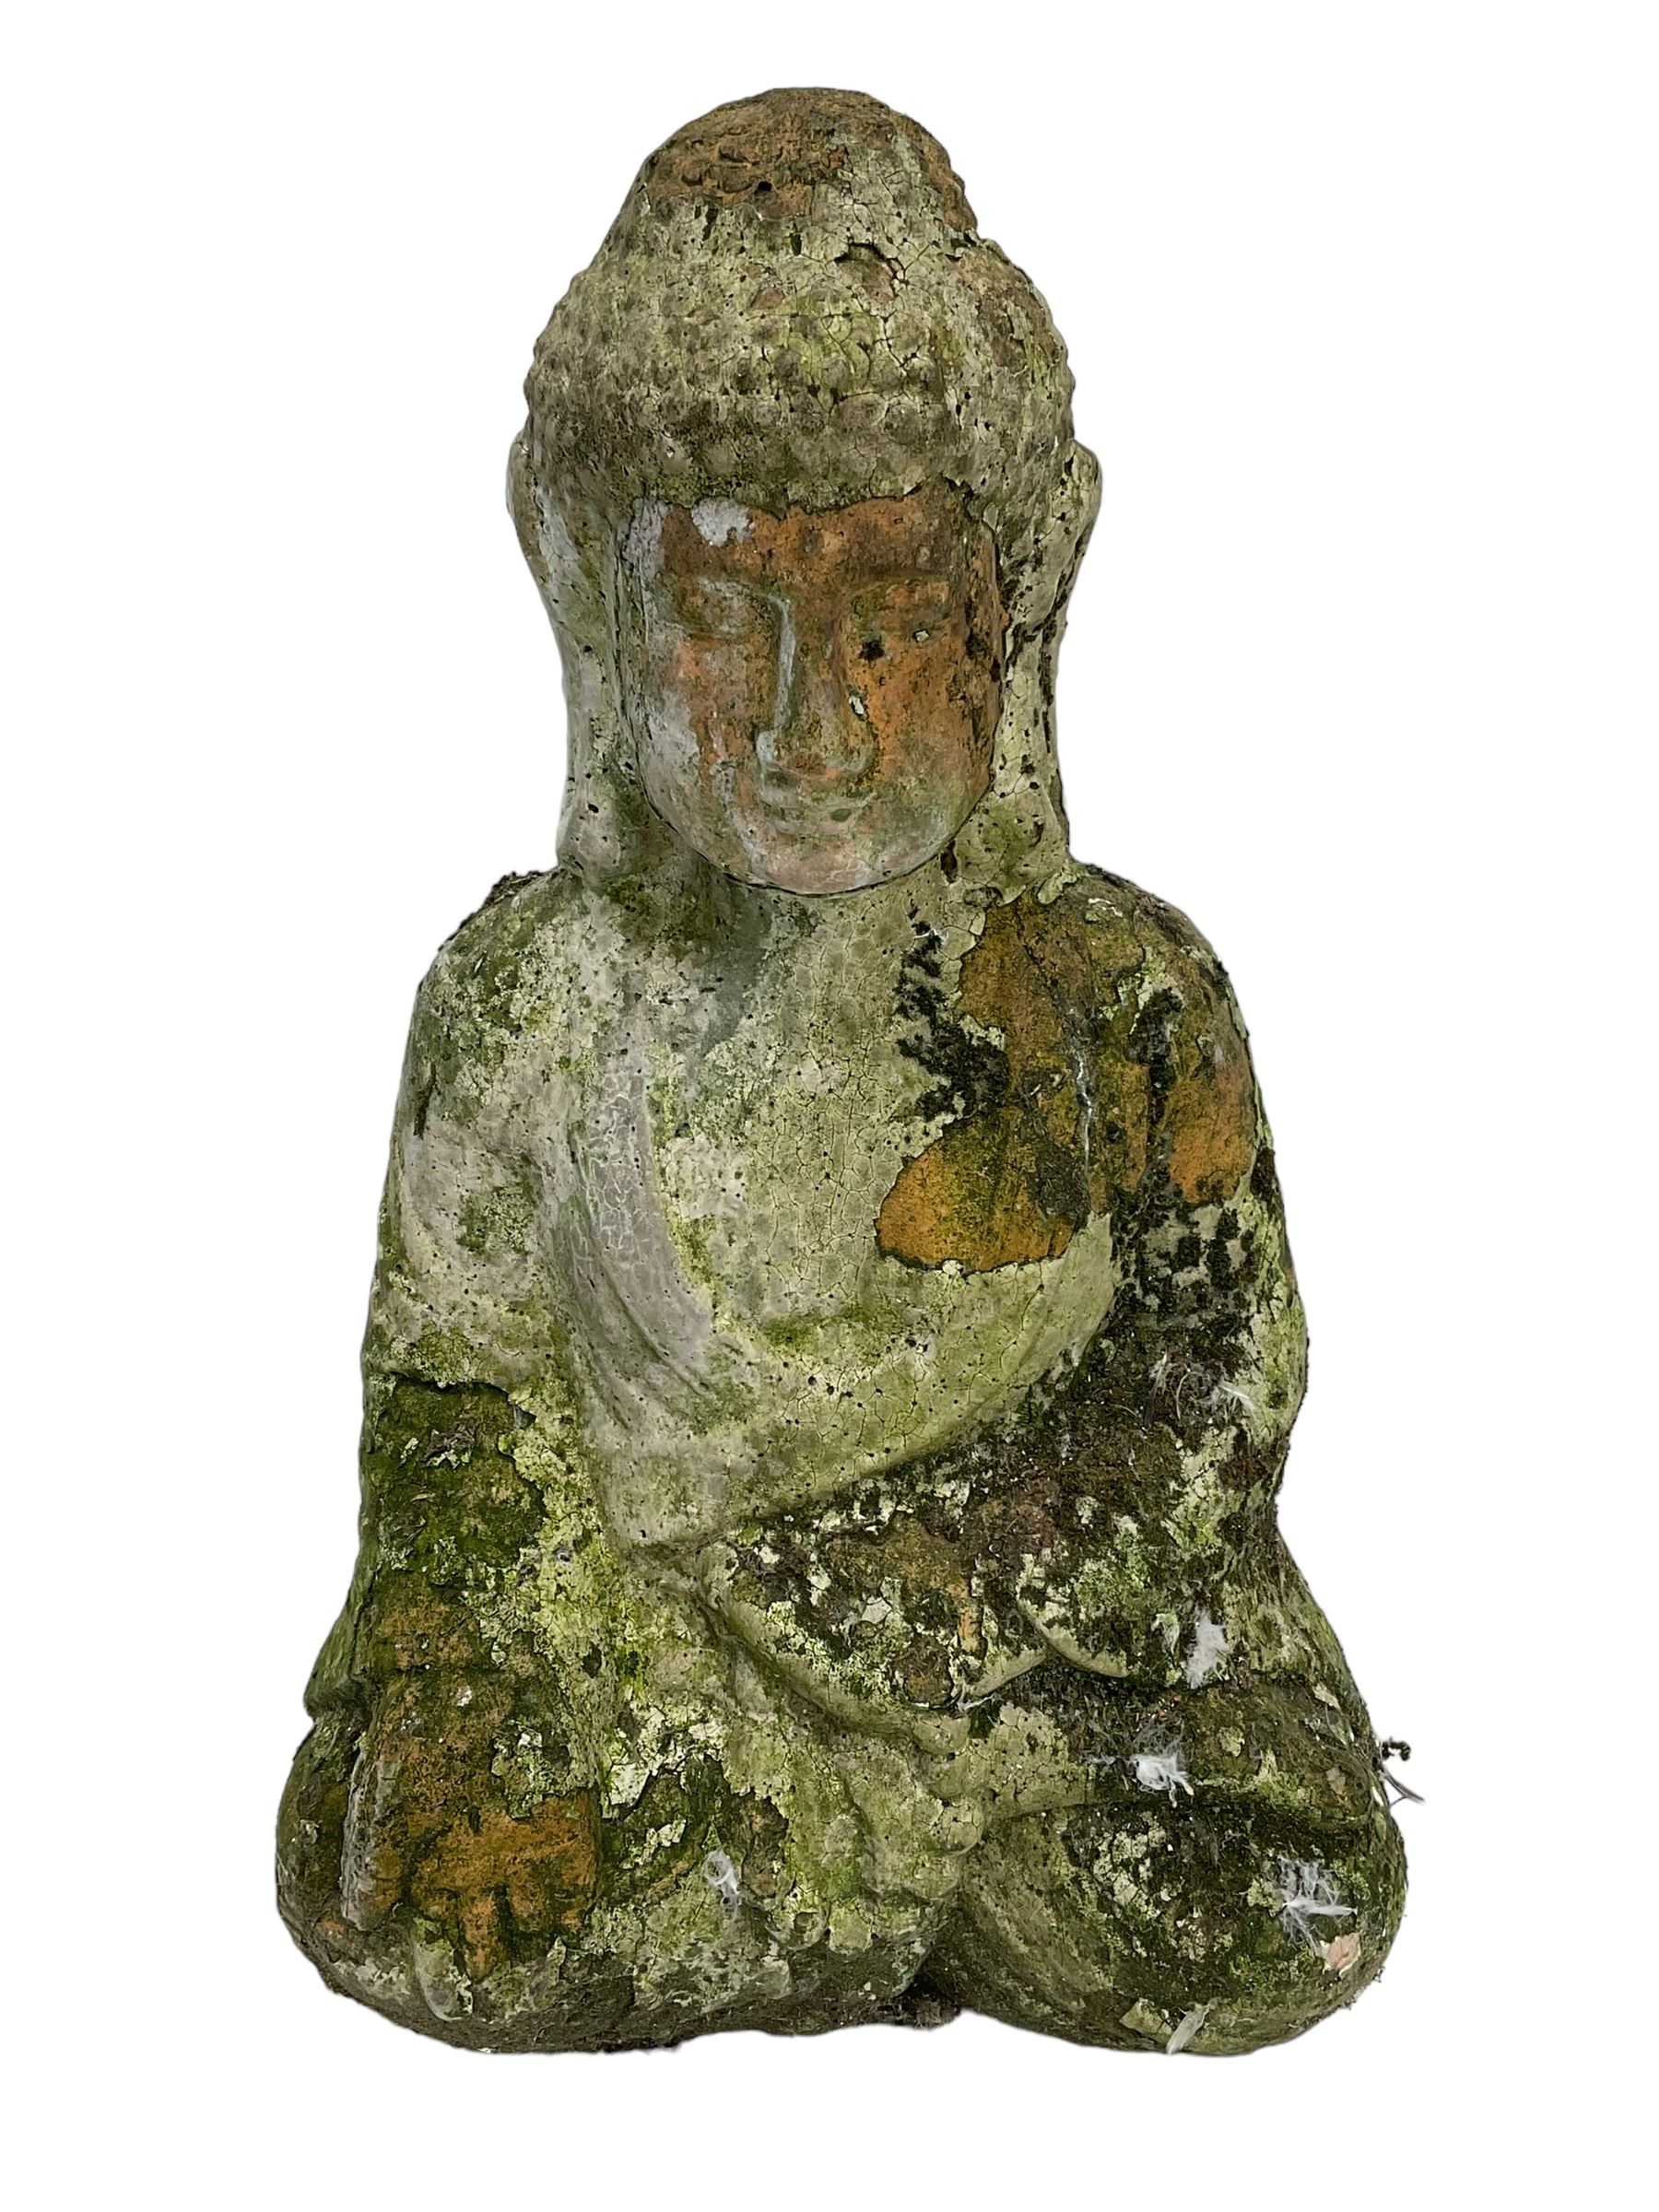 Terracotta garden figure in the form of a seated Buddha - Image 2 of 6